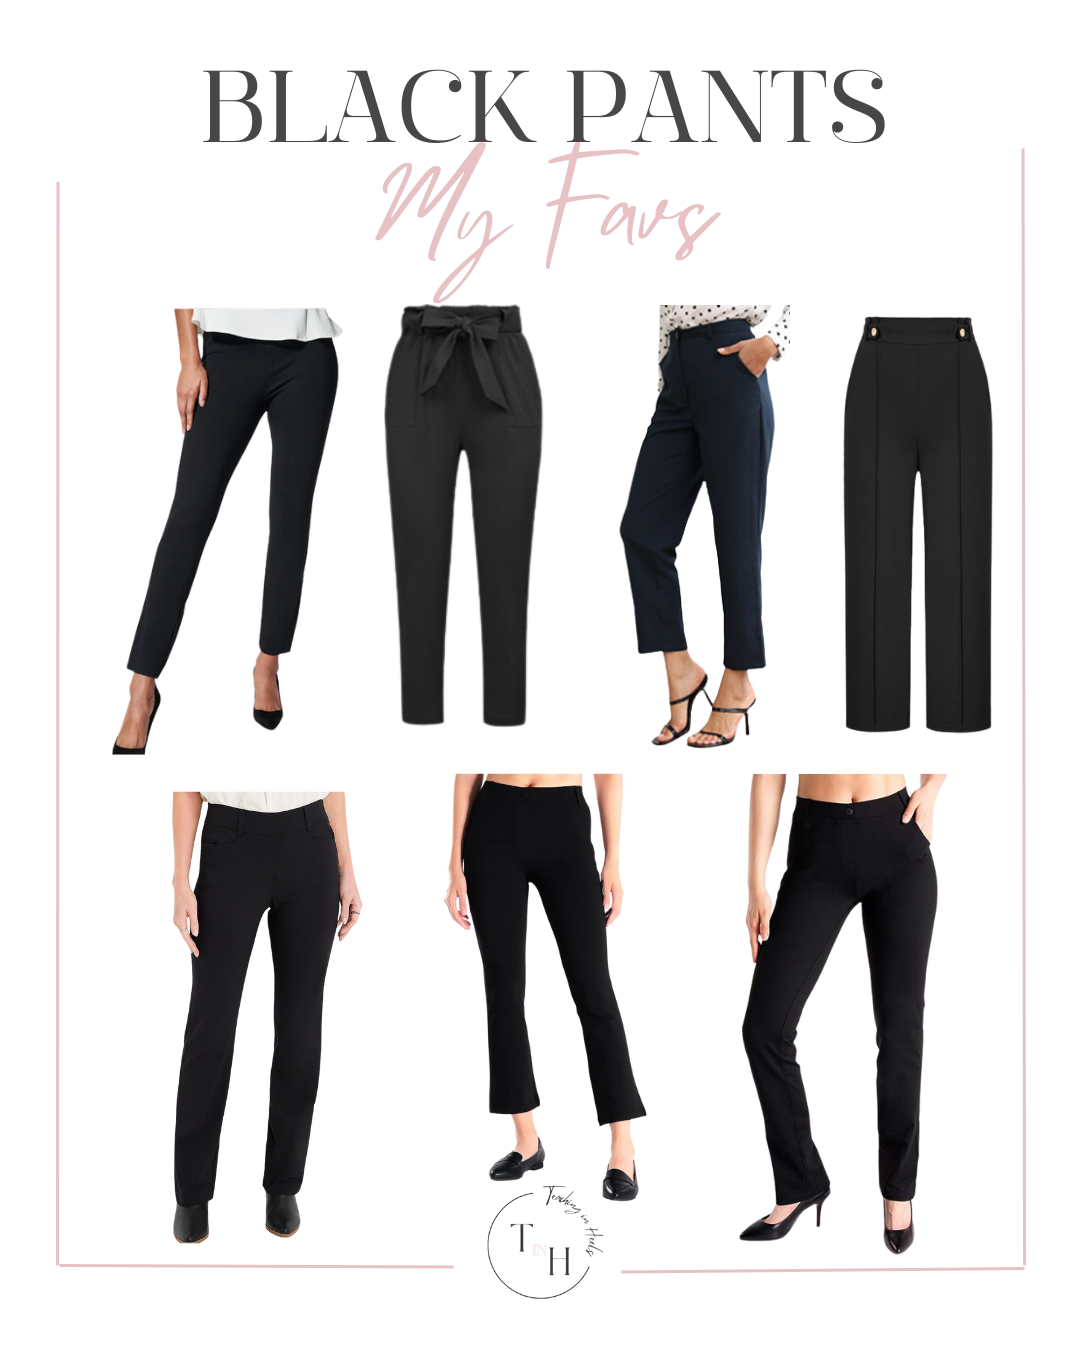 Teacher Approved Black Pants: Find Your Perfect Pair - Teaching in Heels